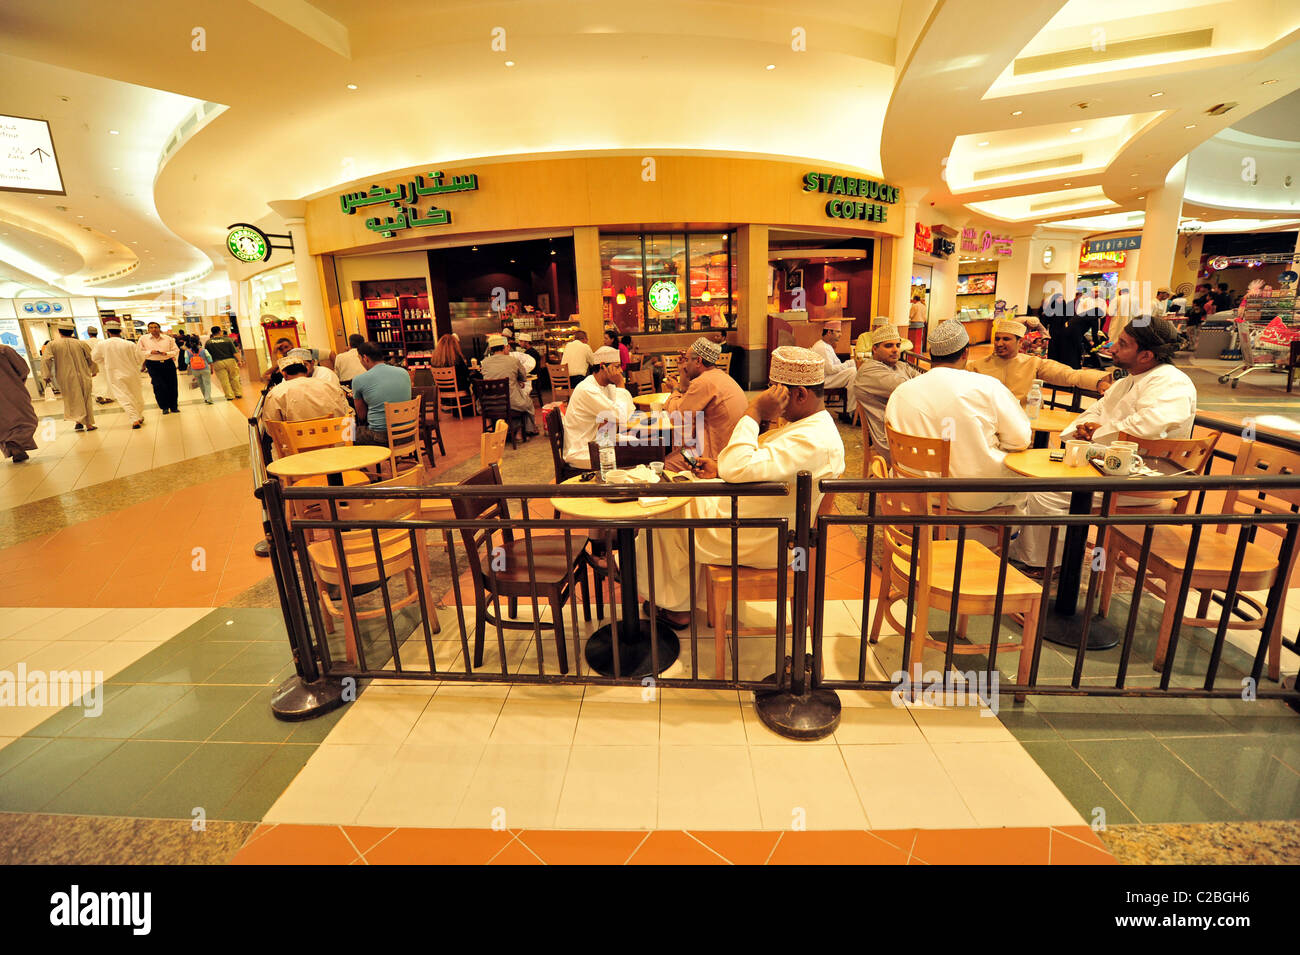 Oman, Muscat, group of people sitting in the cafe at the shopping mall Stock Photo